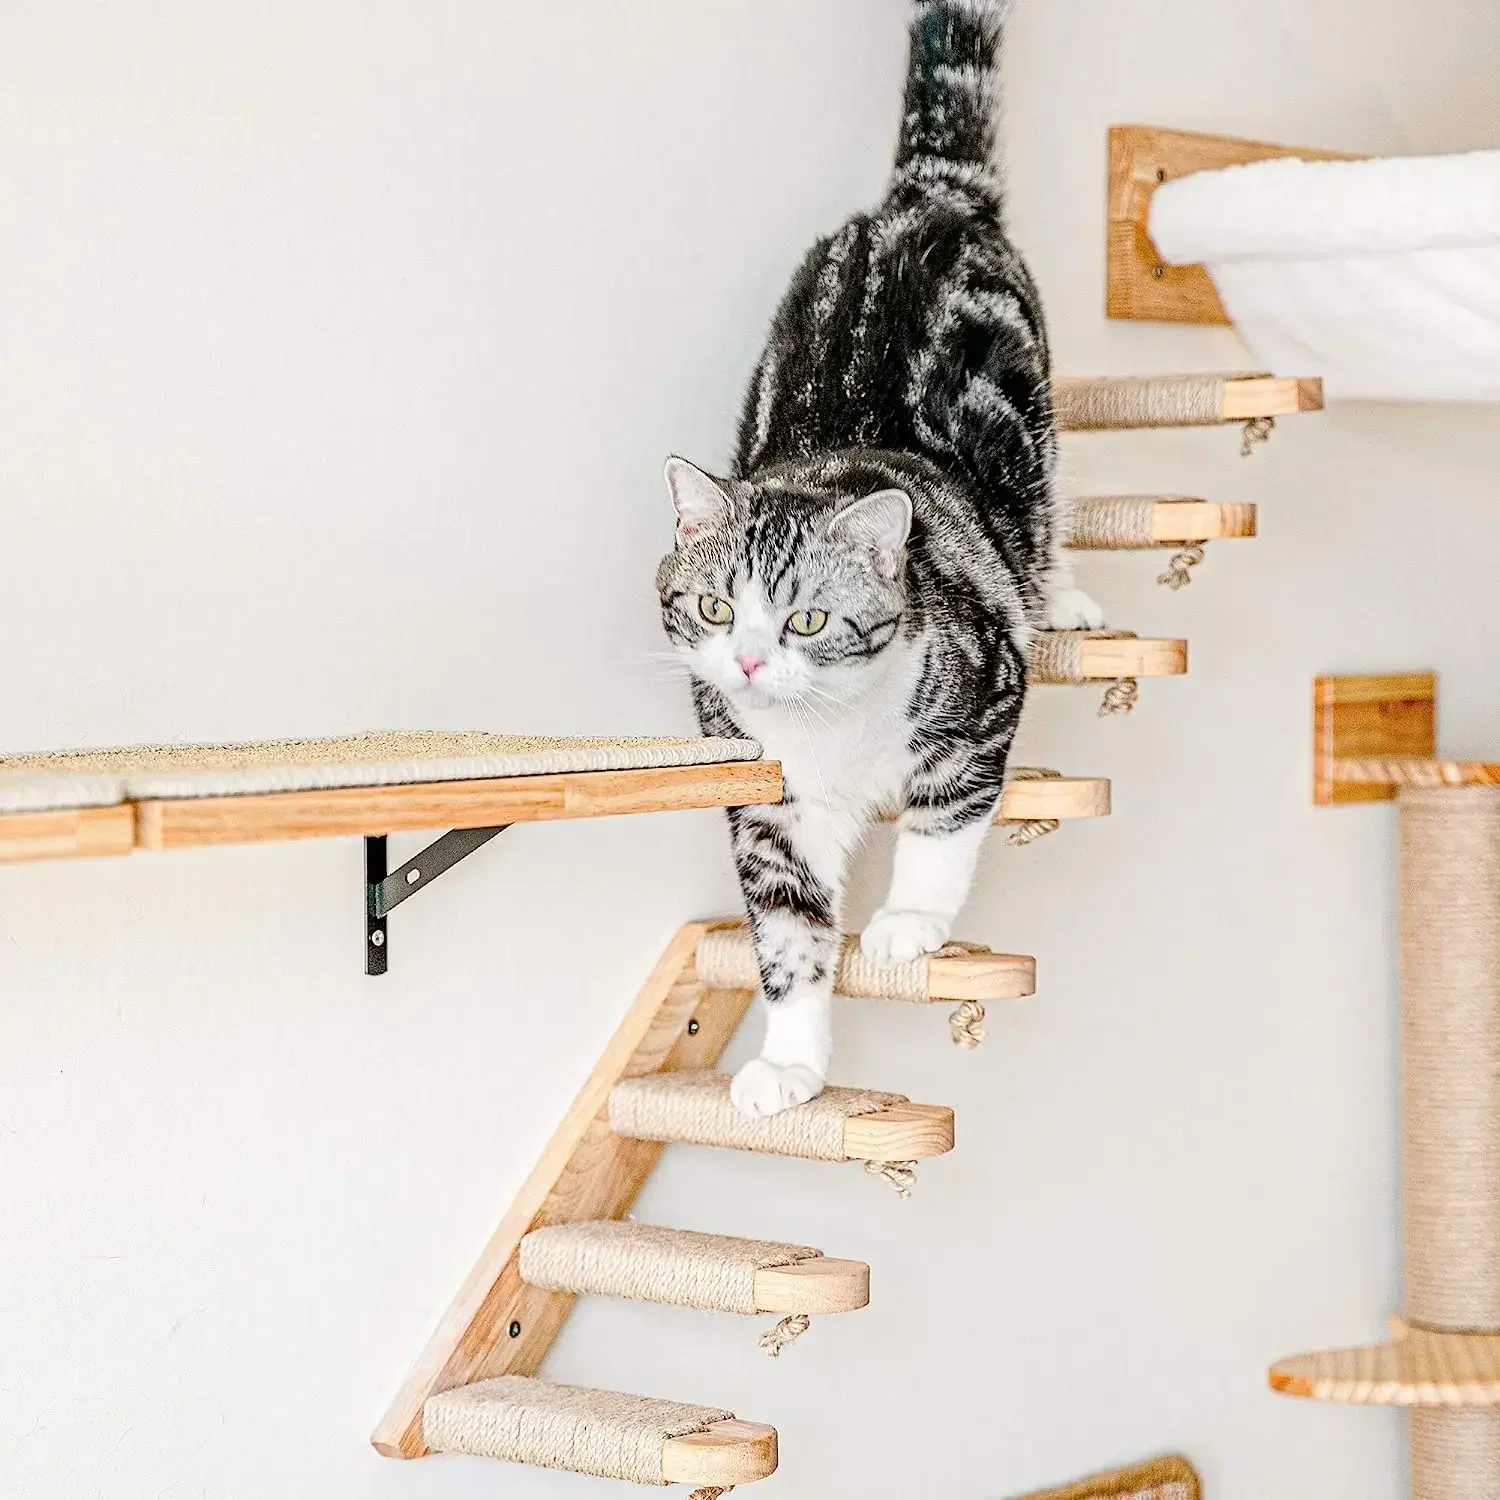 

Wall for Mounted Hammock Stairway 2 Cat Playing Perch Wooden And Pieces Climbing Bed Furniture Sleeping